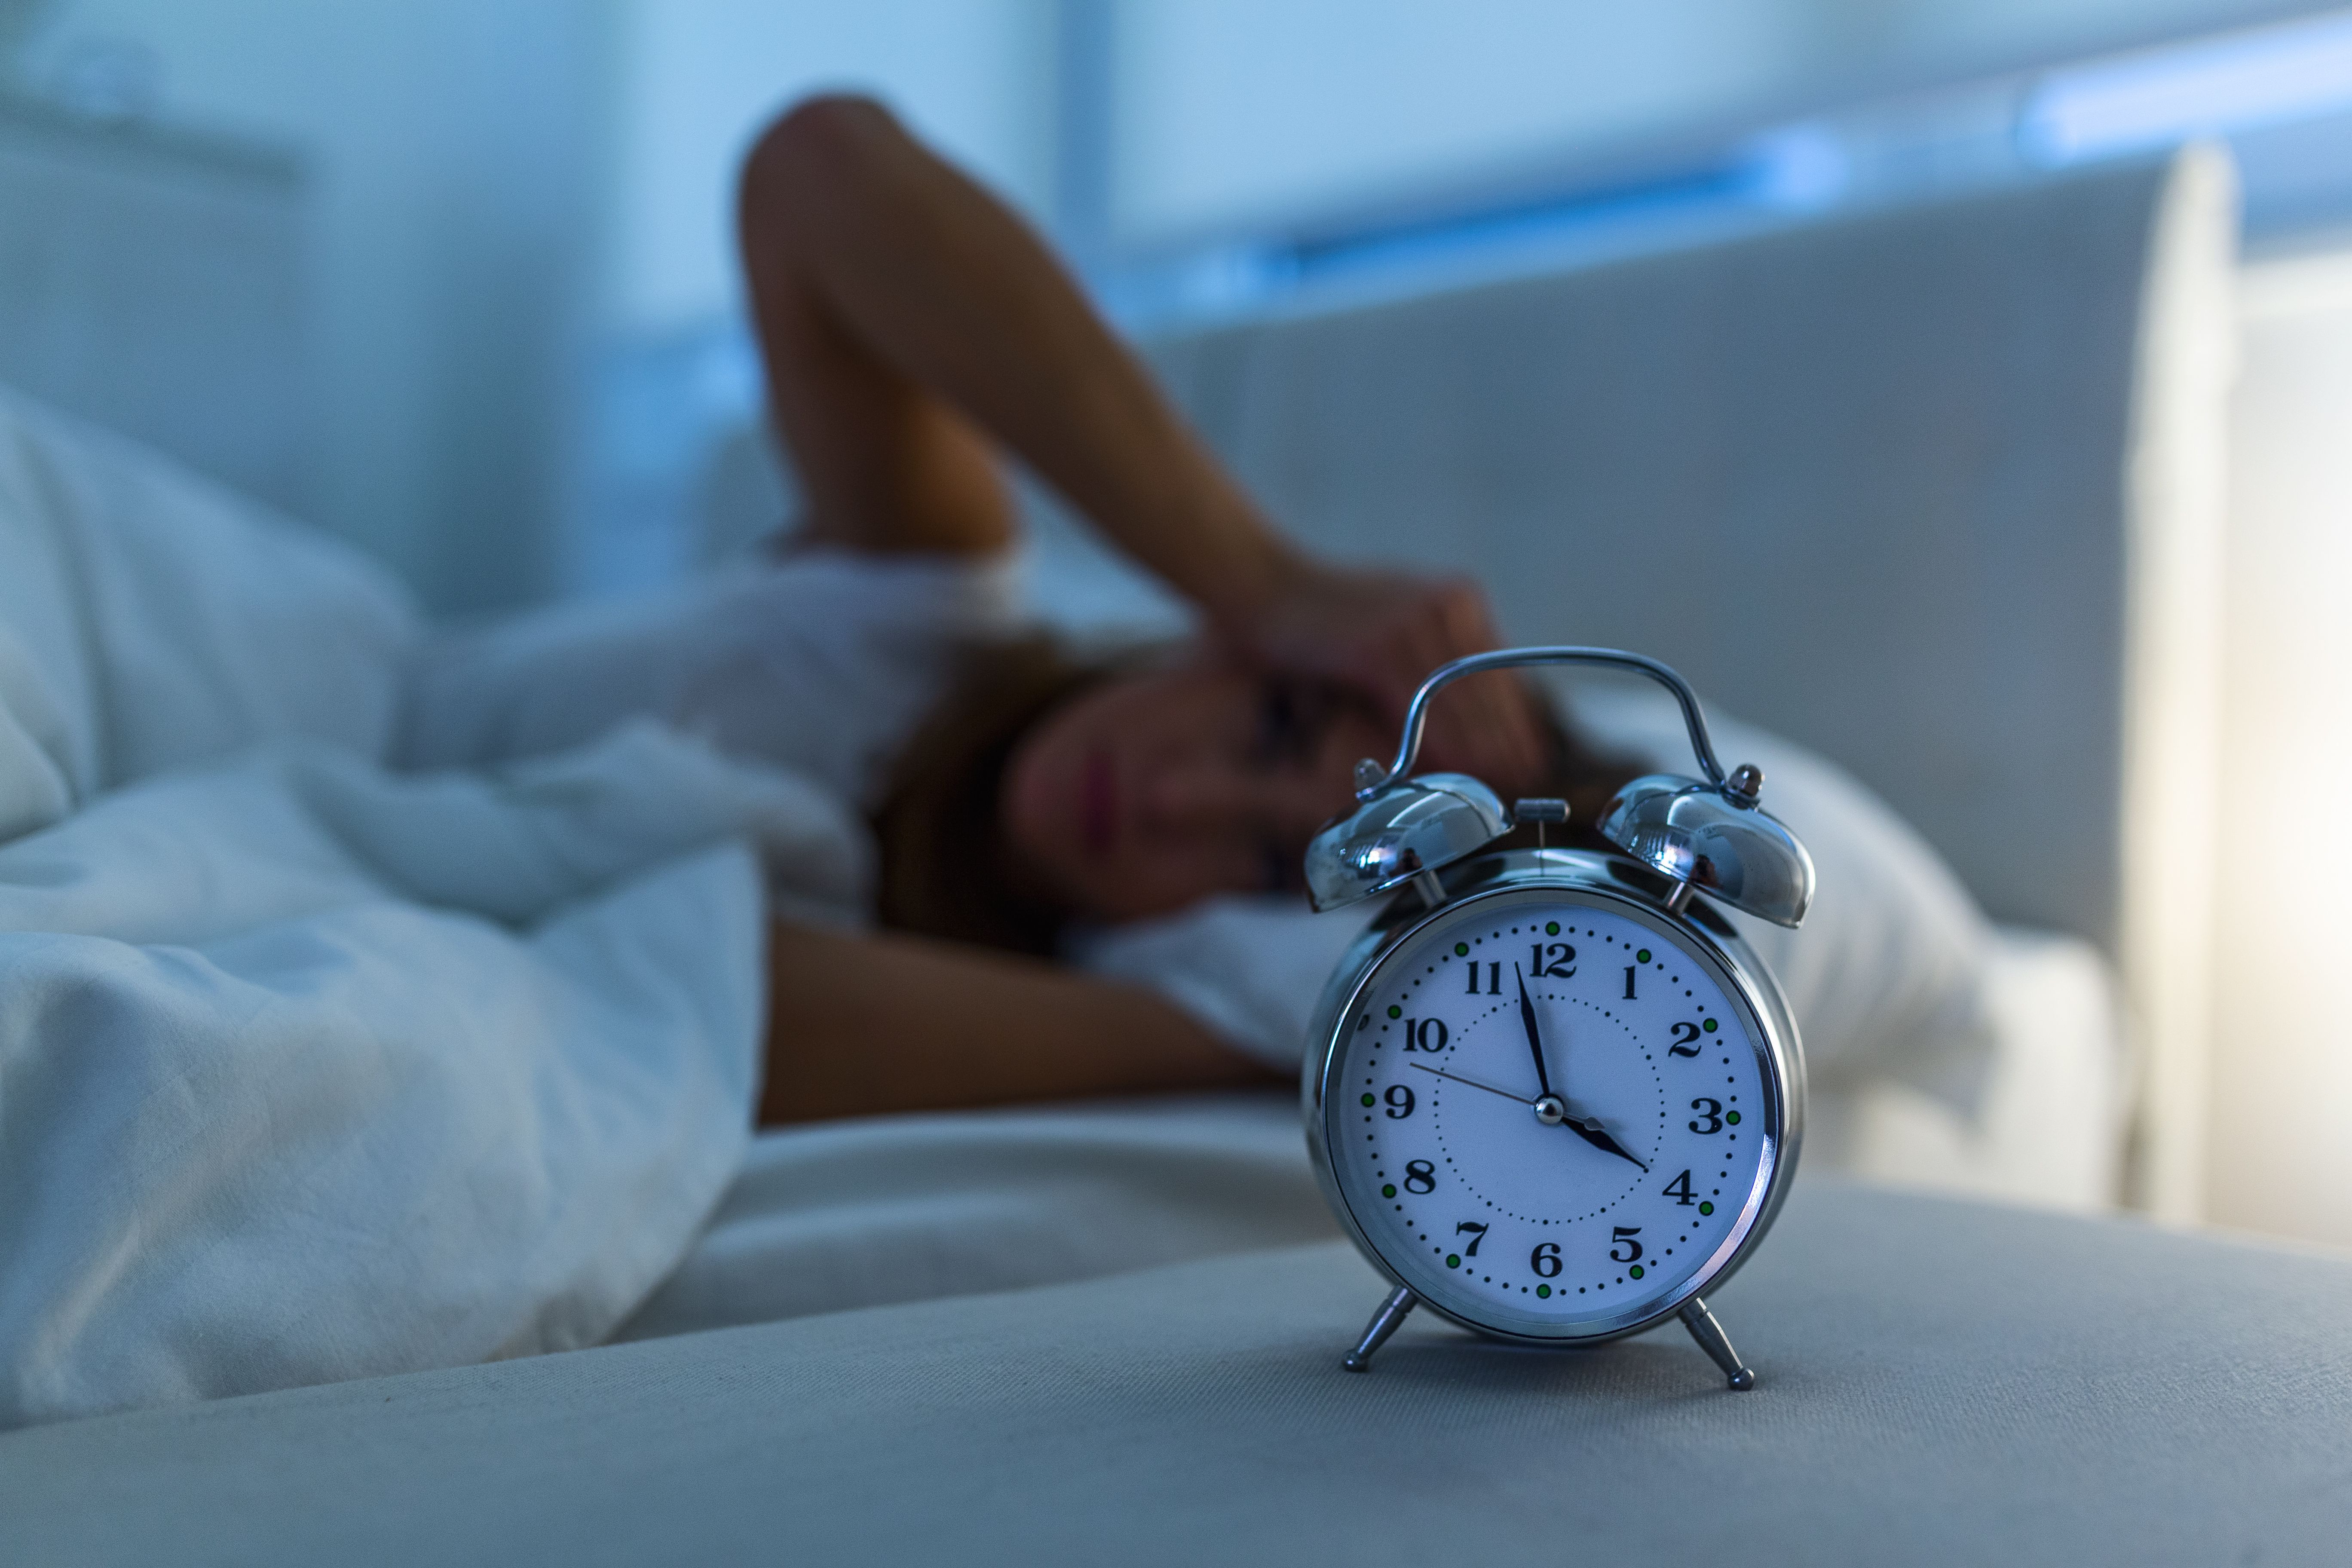 New study suggests insomnia symptoms are linked to increased risk of stroke